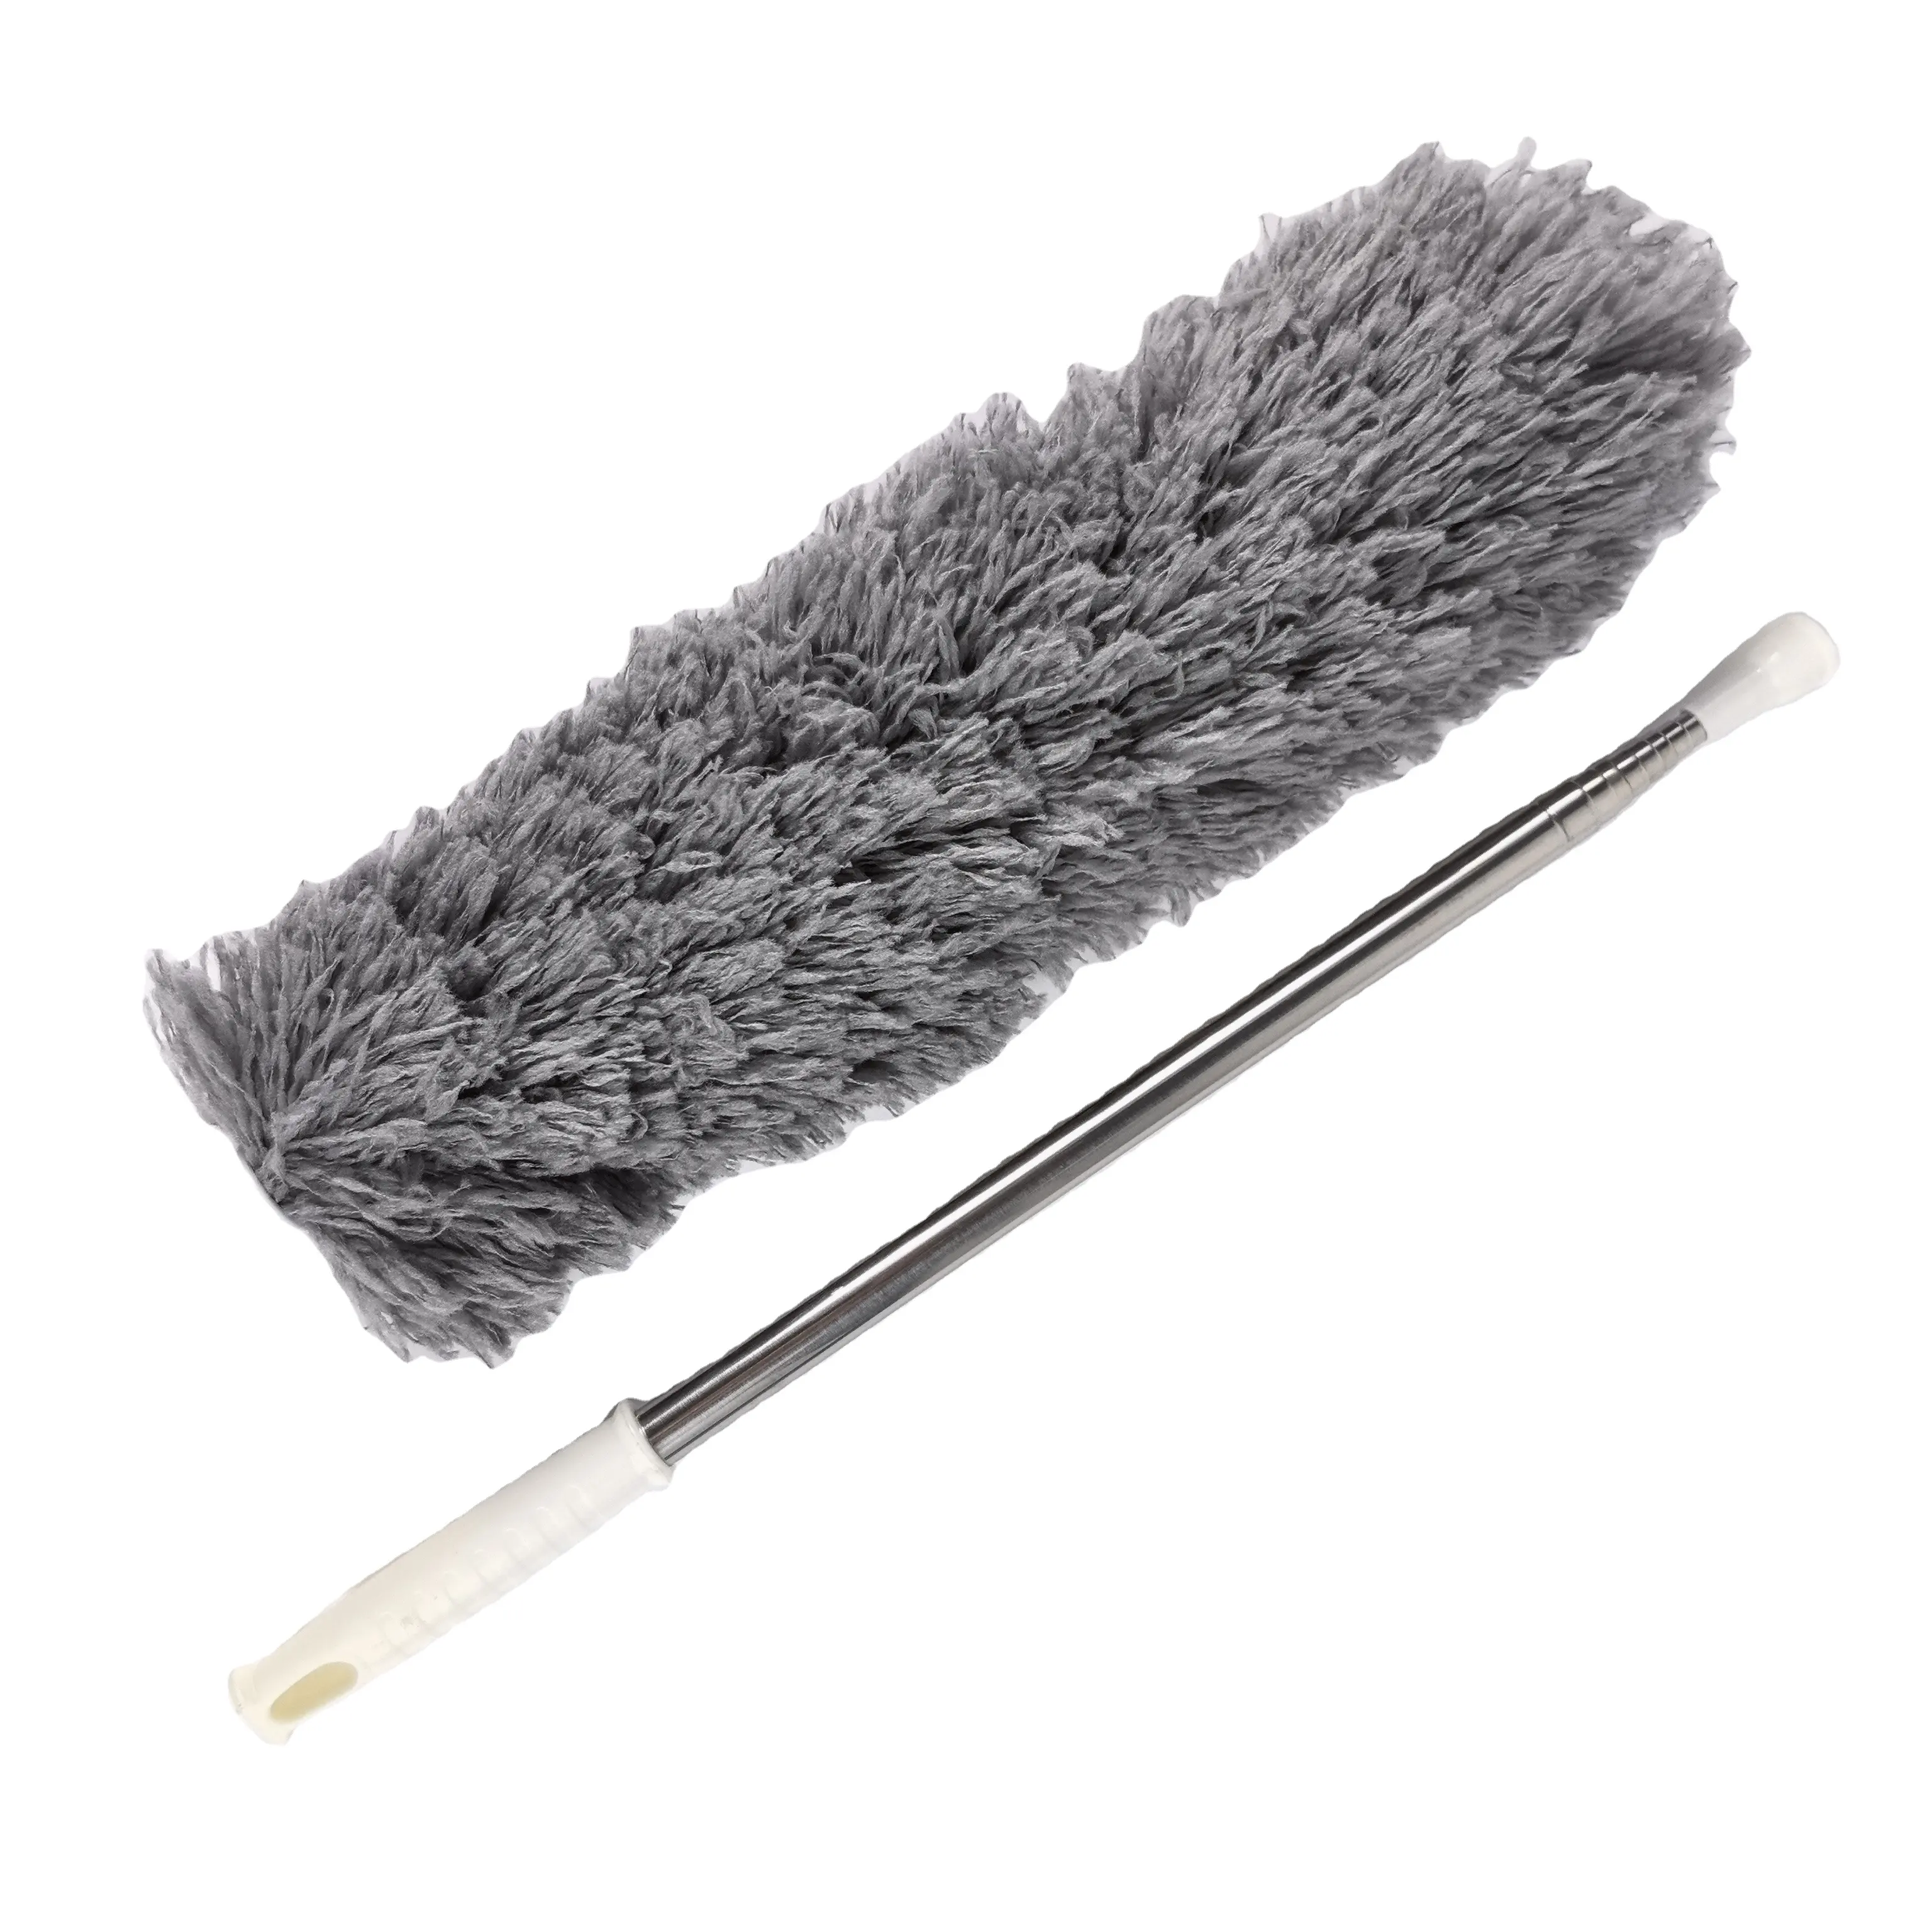 2.8meters Telescopic Microfiber Feather Ceiling Fan Duster Versatile Cleaning Tool with Steel Pipe Flexible and Comprehensive